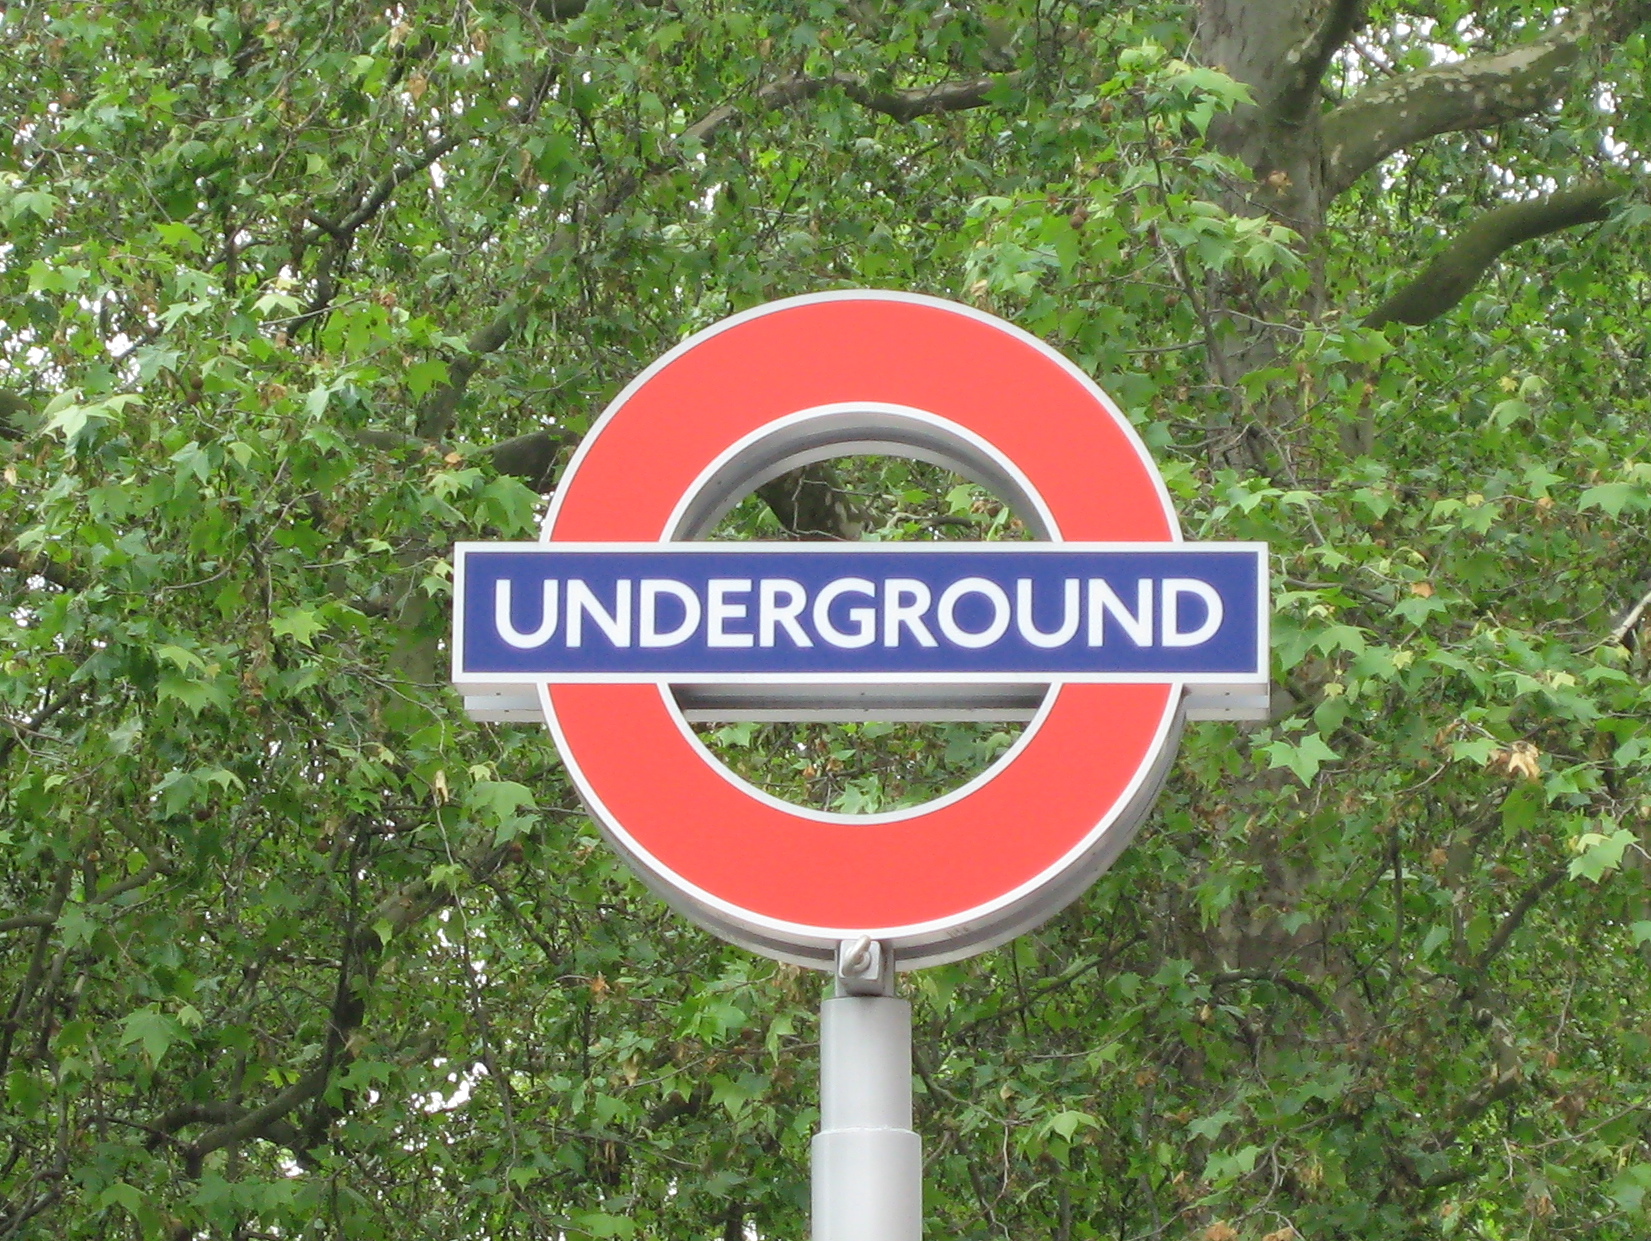 The Underground...a must for getting around London. Photo by me